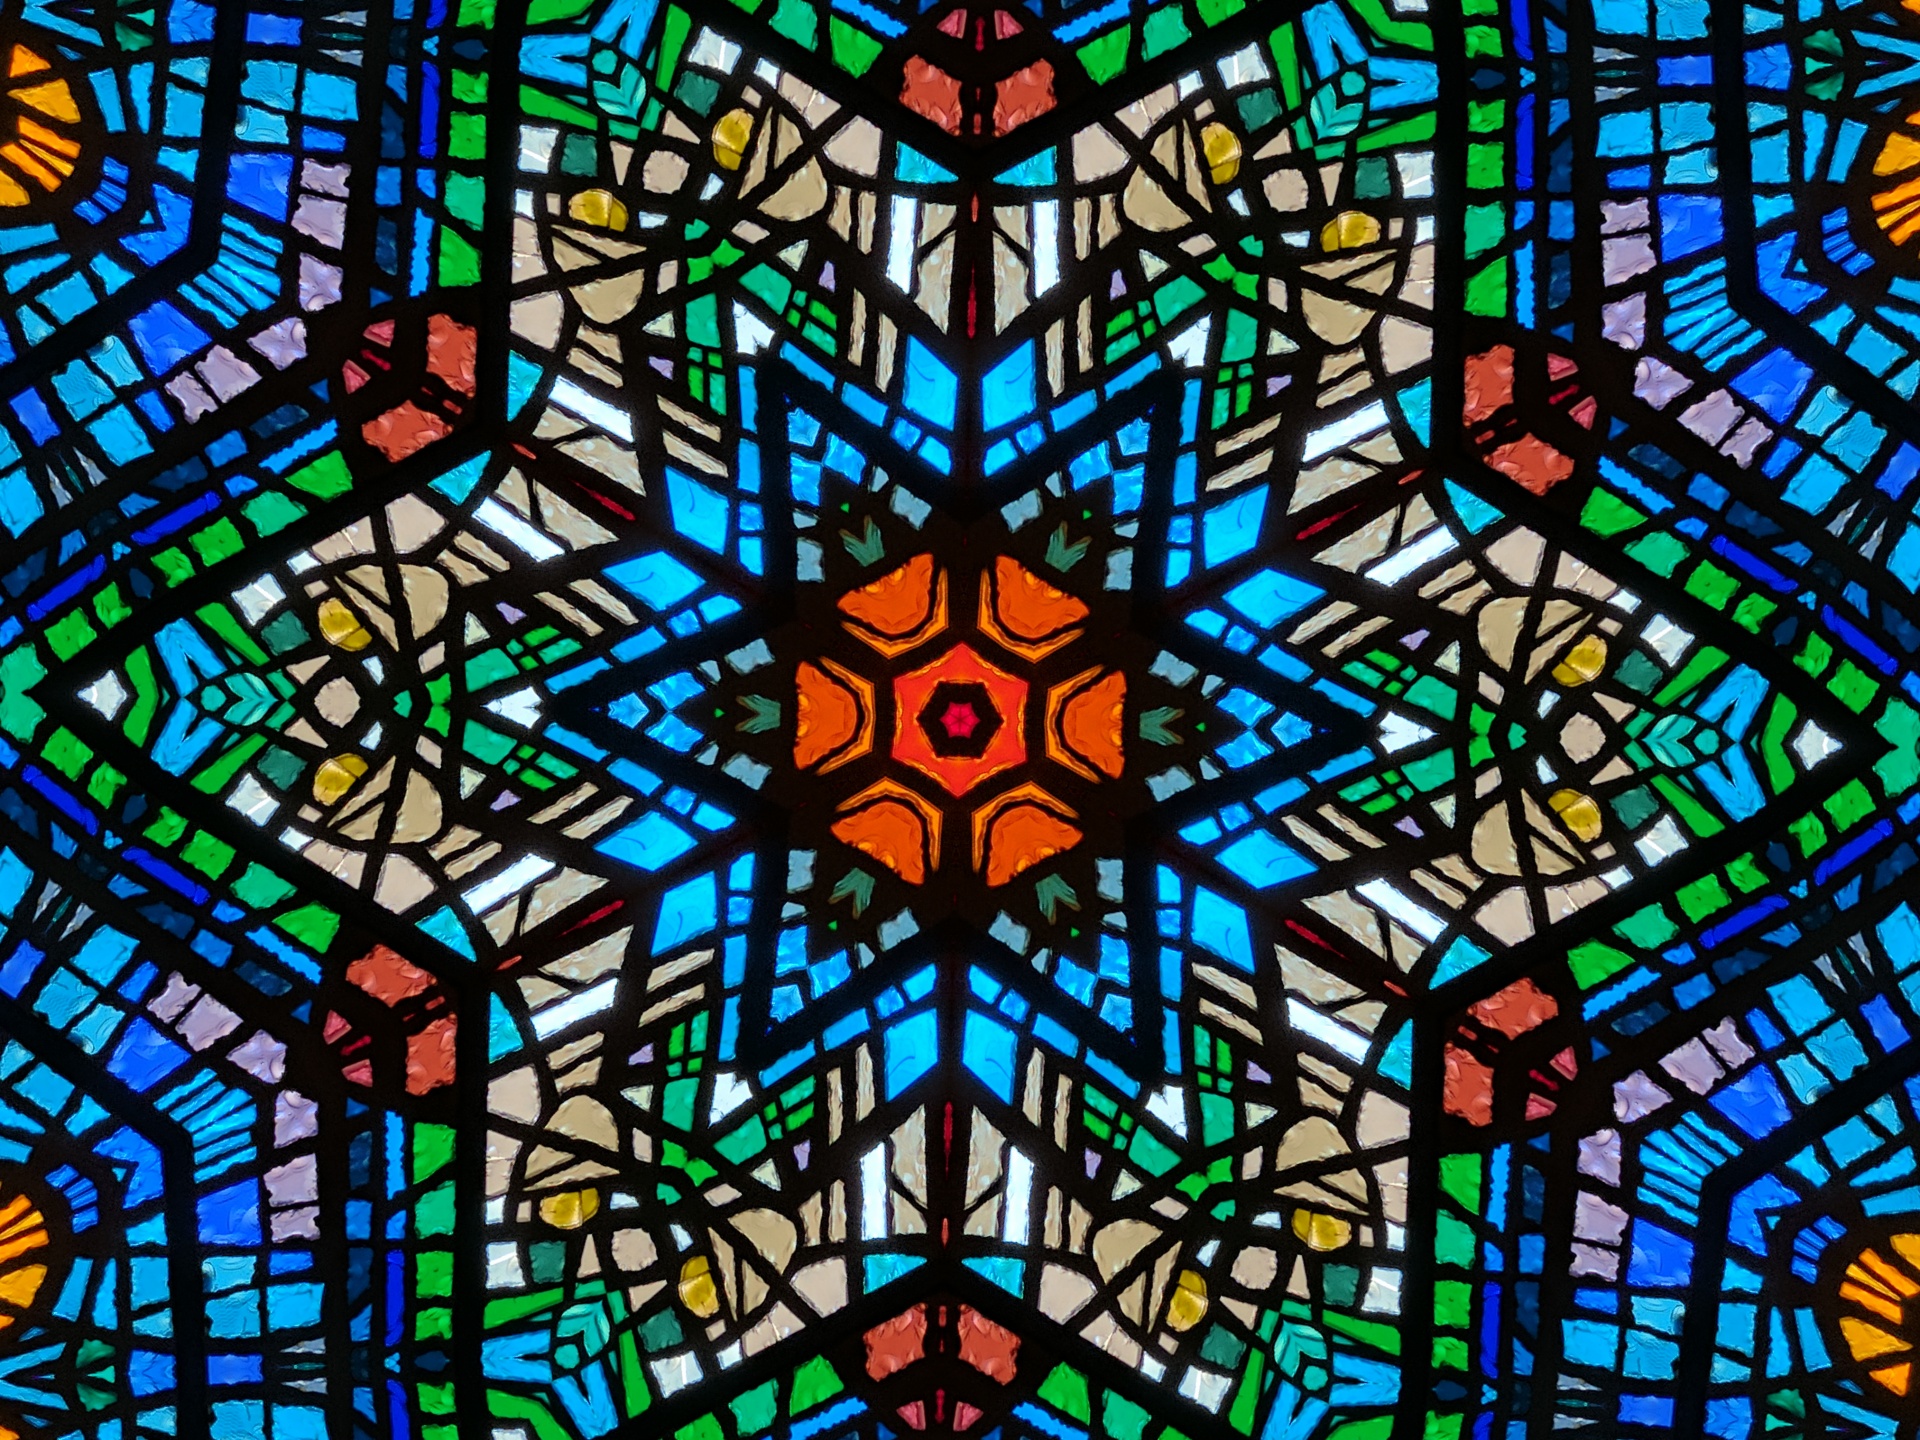 Background Wallpaper Stained glass Free Photo - Stained Glass - 1920x1440  Wallpaper 